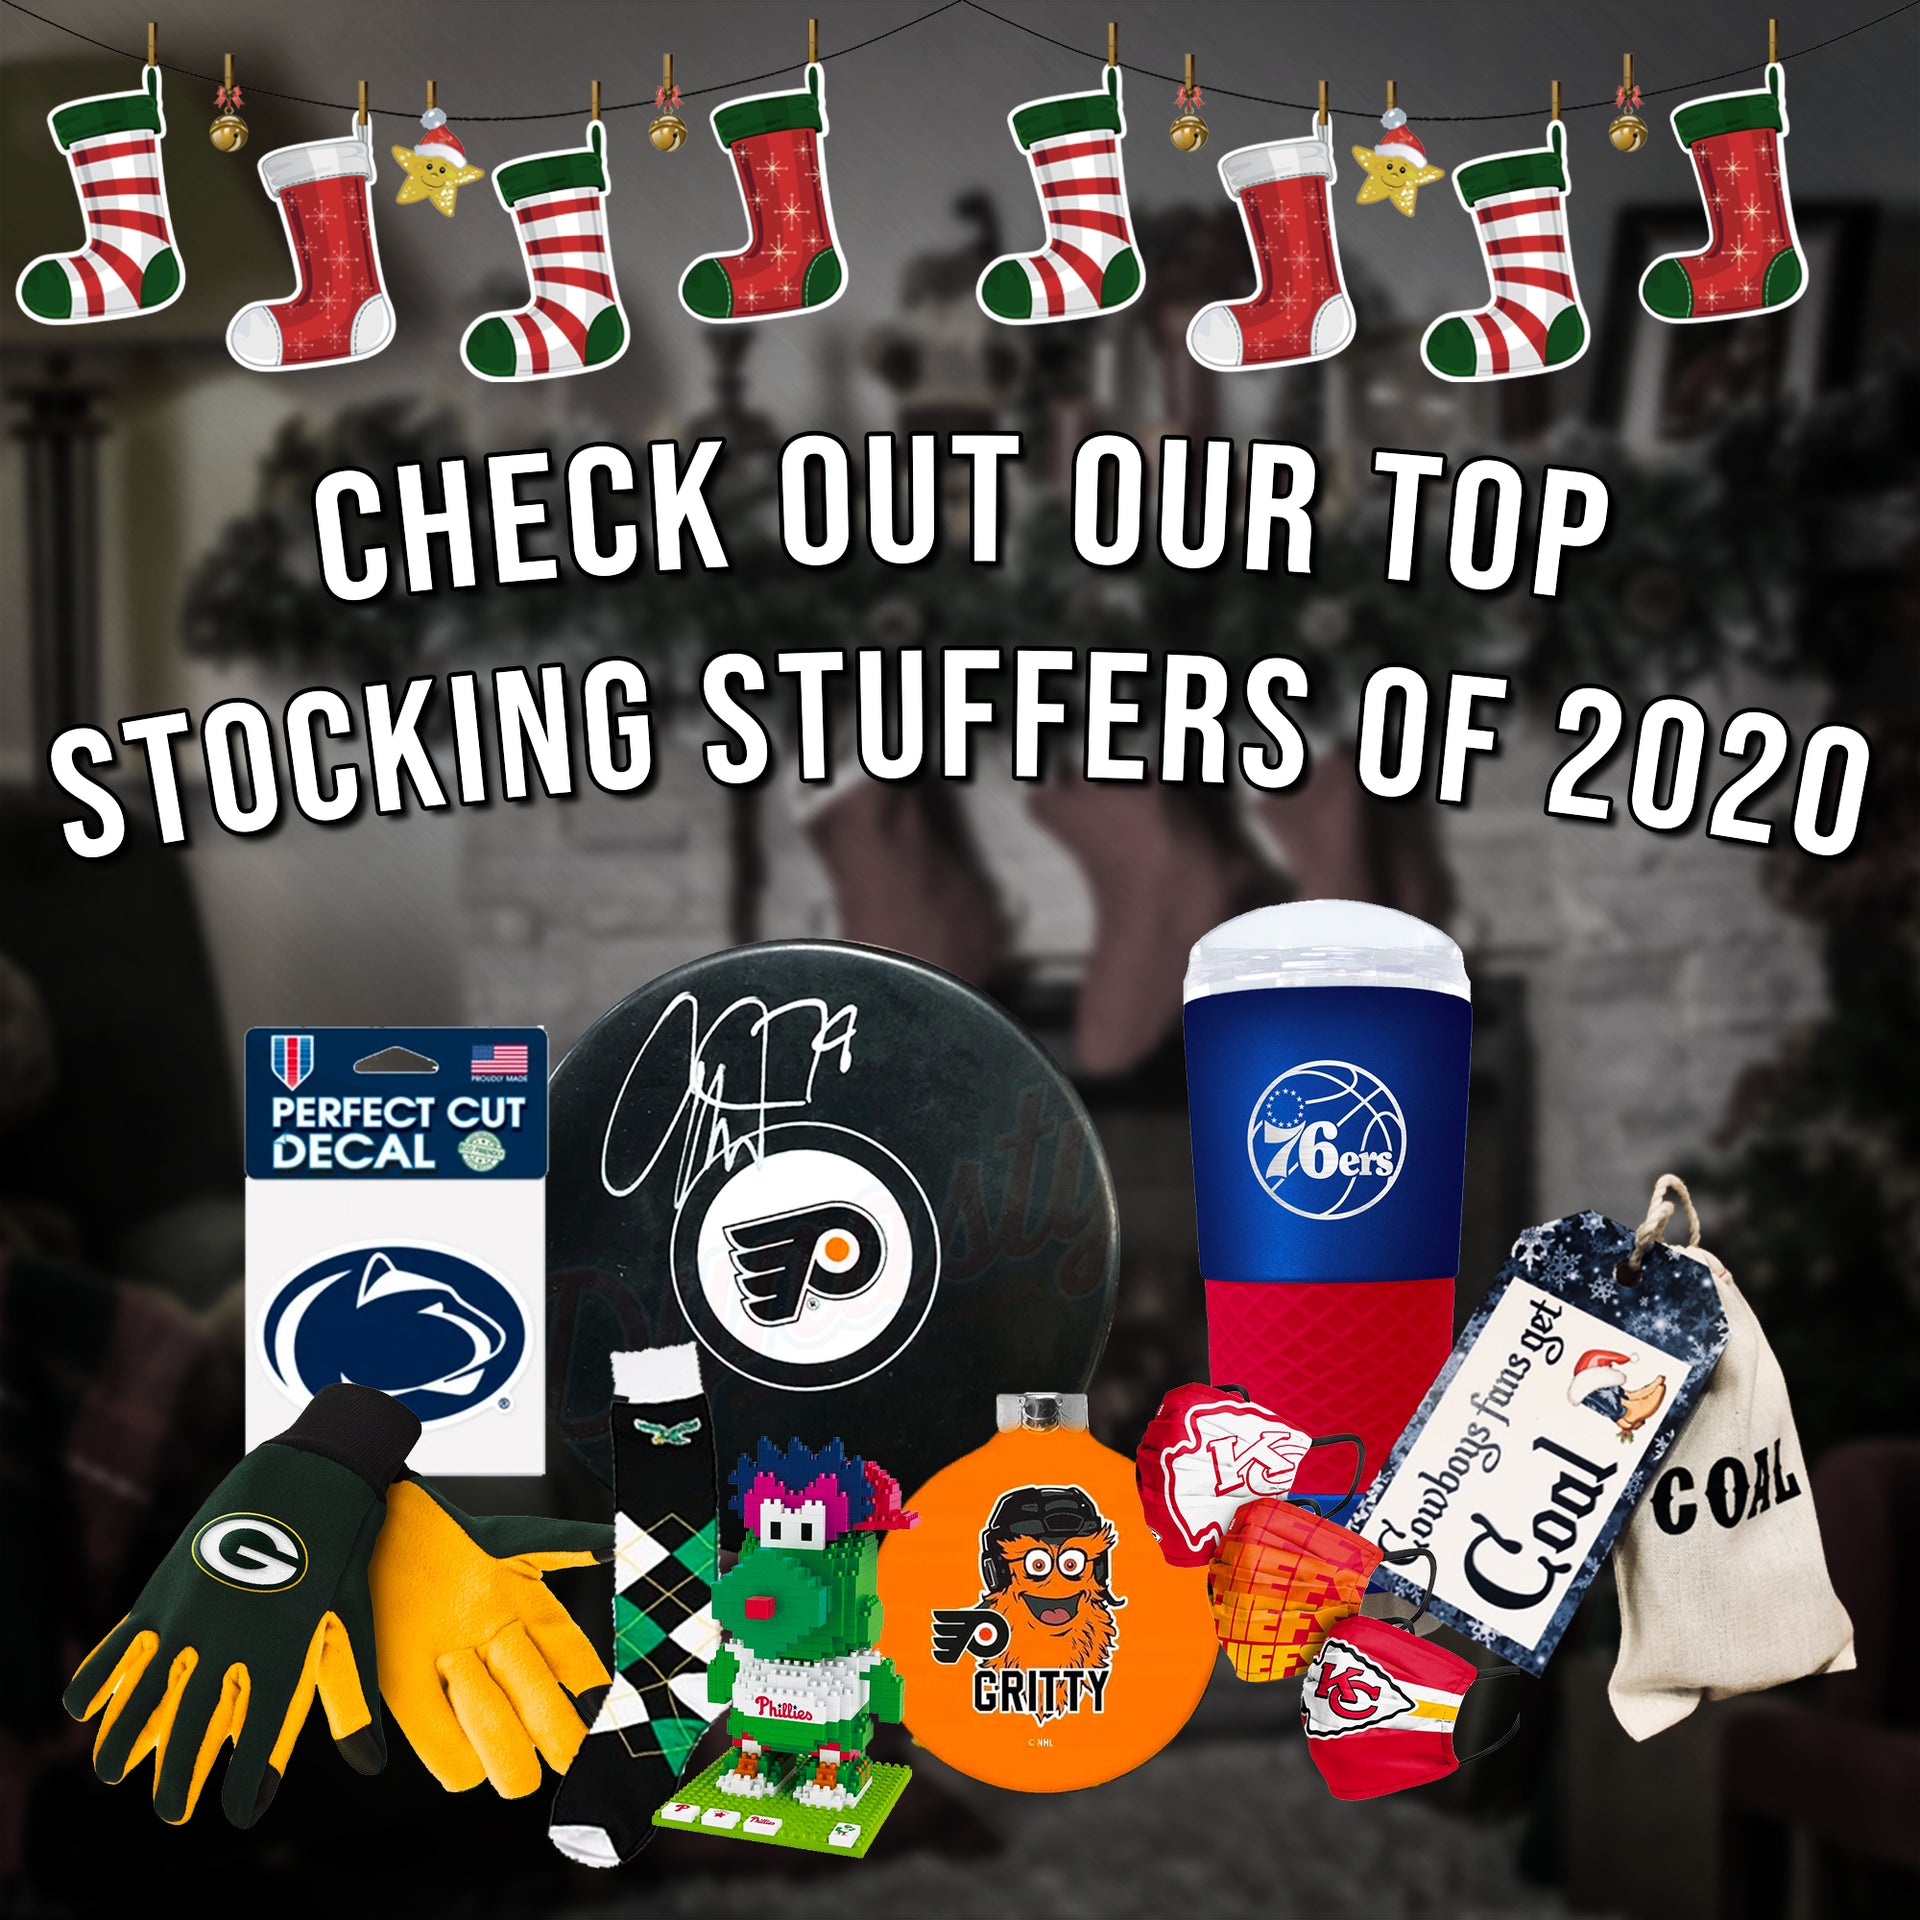 Our Stocking Stuffers 2020